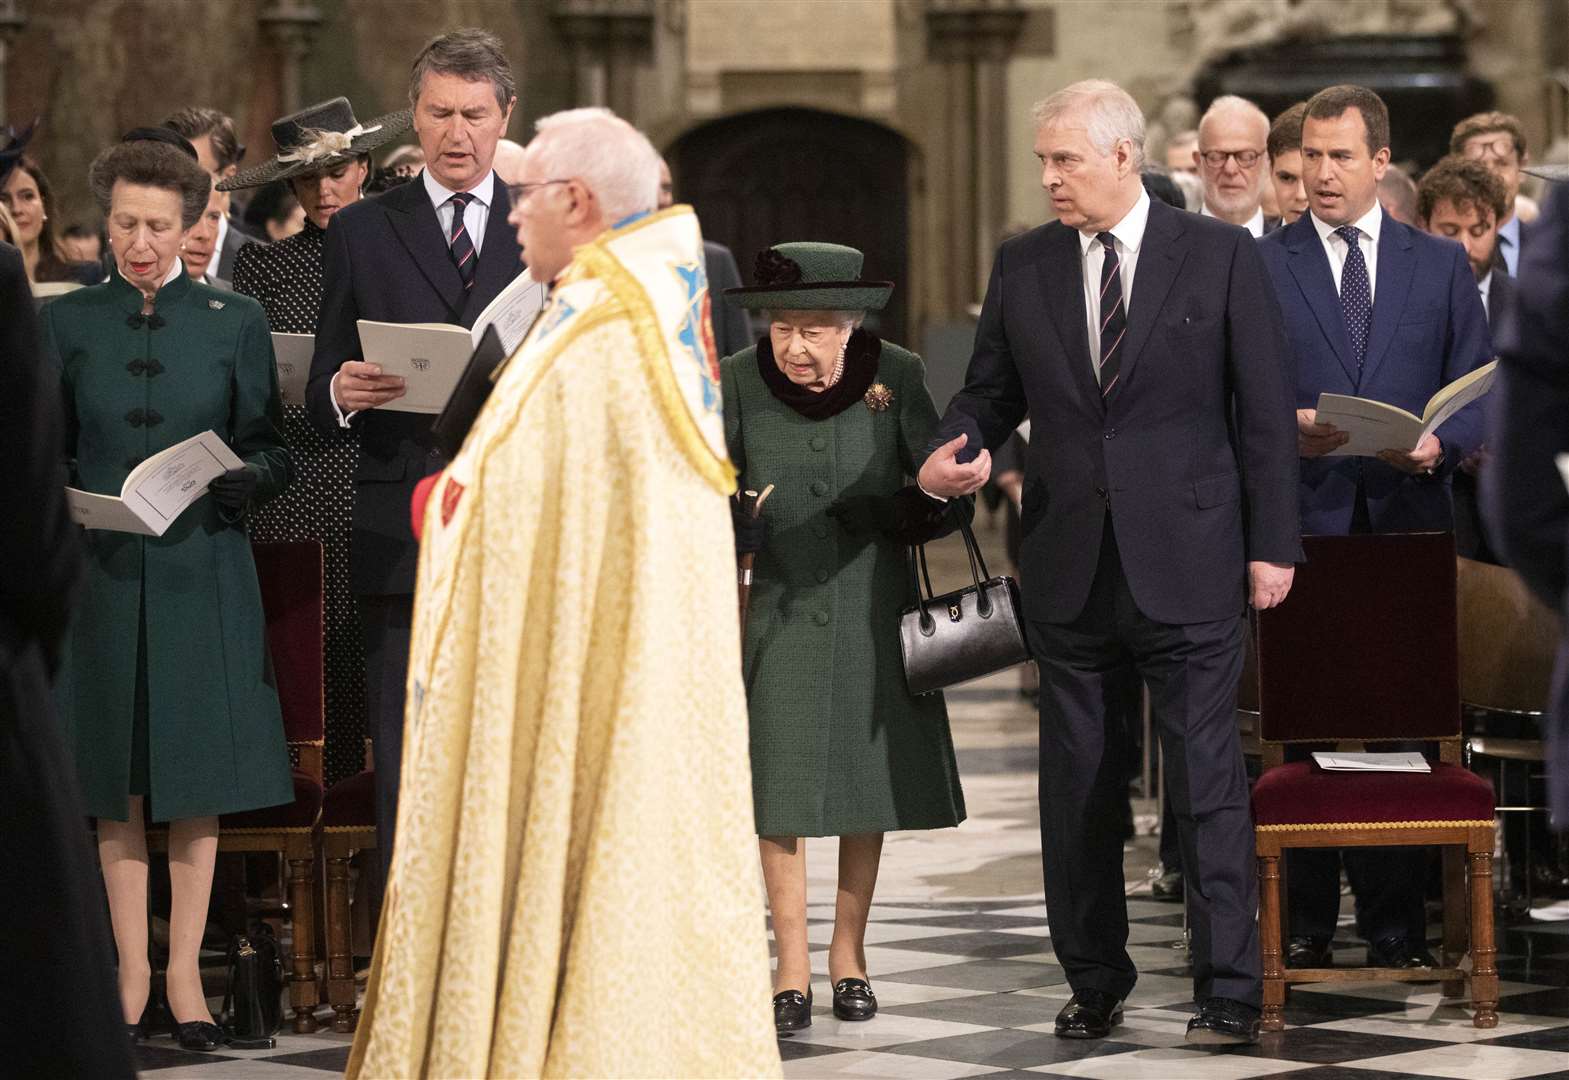 The Queen holds on to the Duke of York for support at the Duke of Edinburgh’s memorial service (Richard Pohle/The Times/PA)